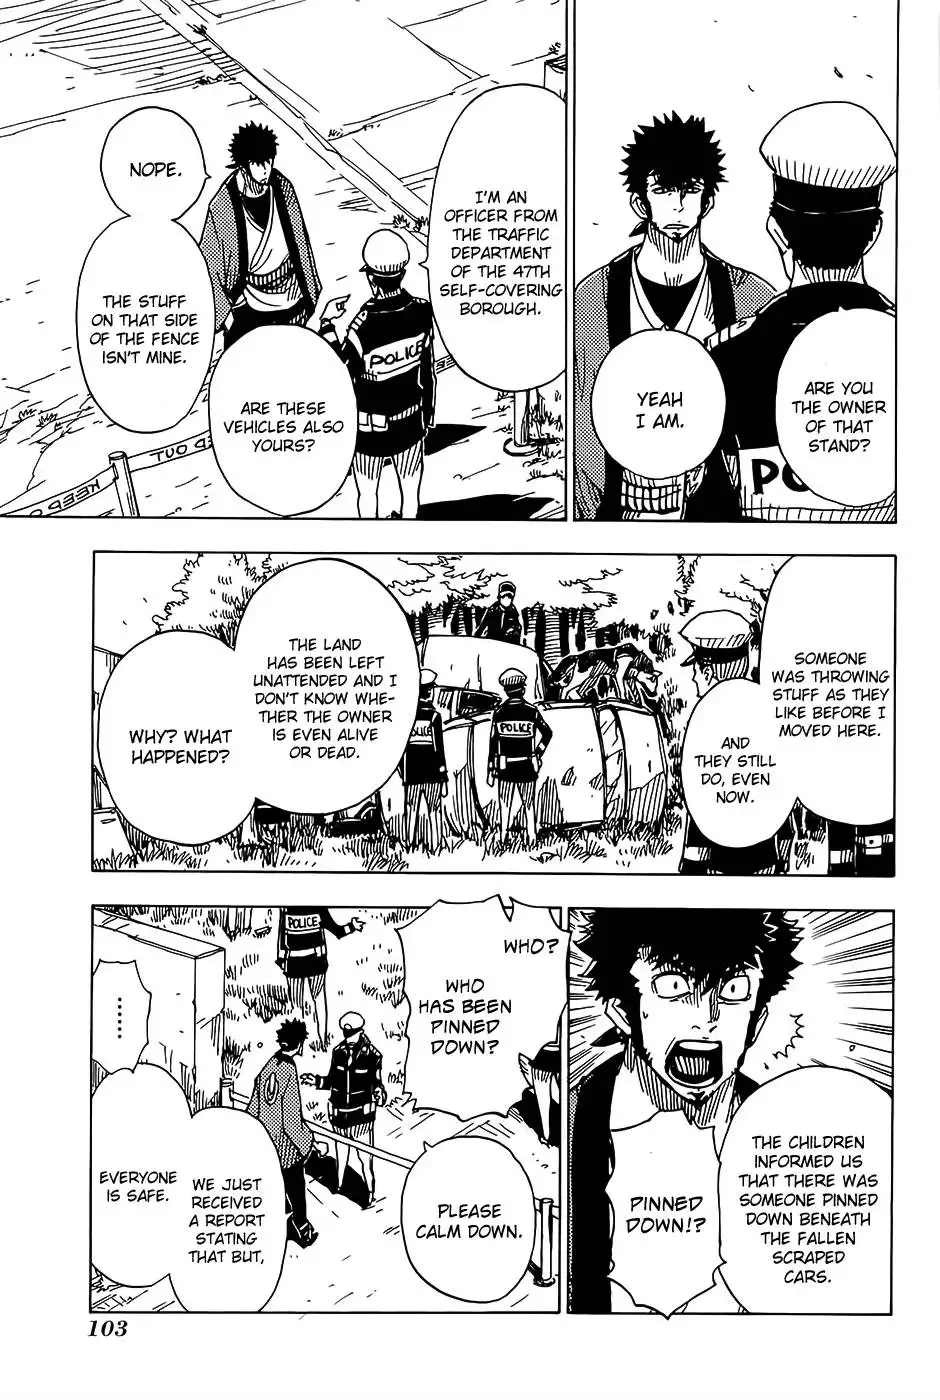 Dimension W Chapter 12